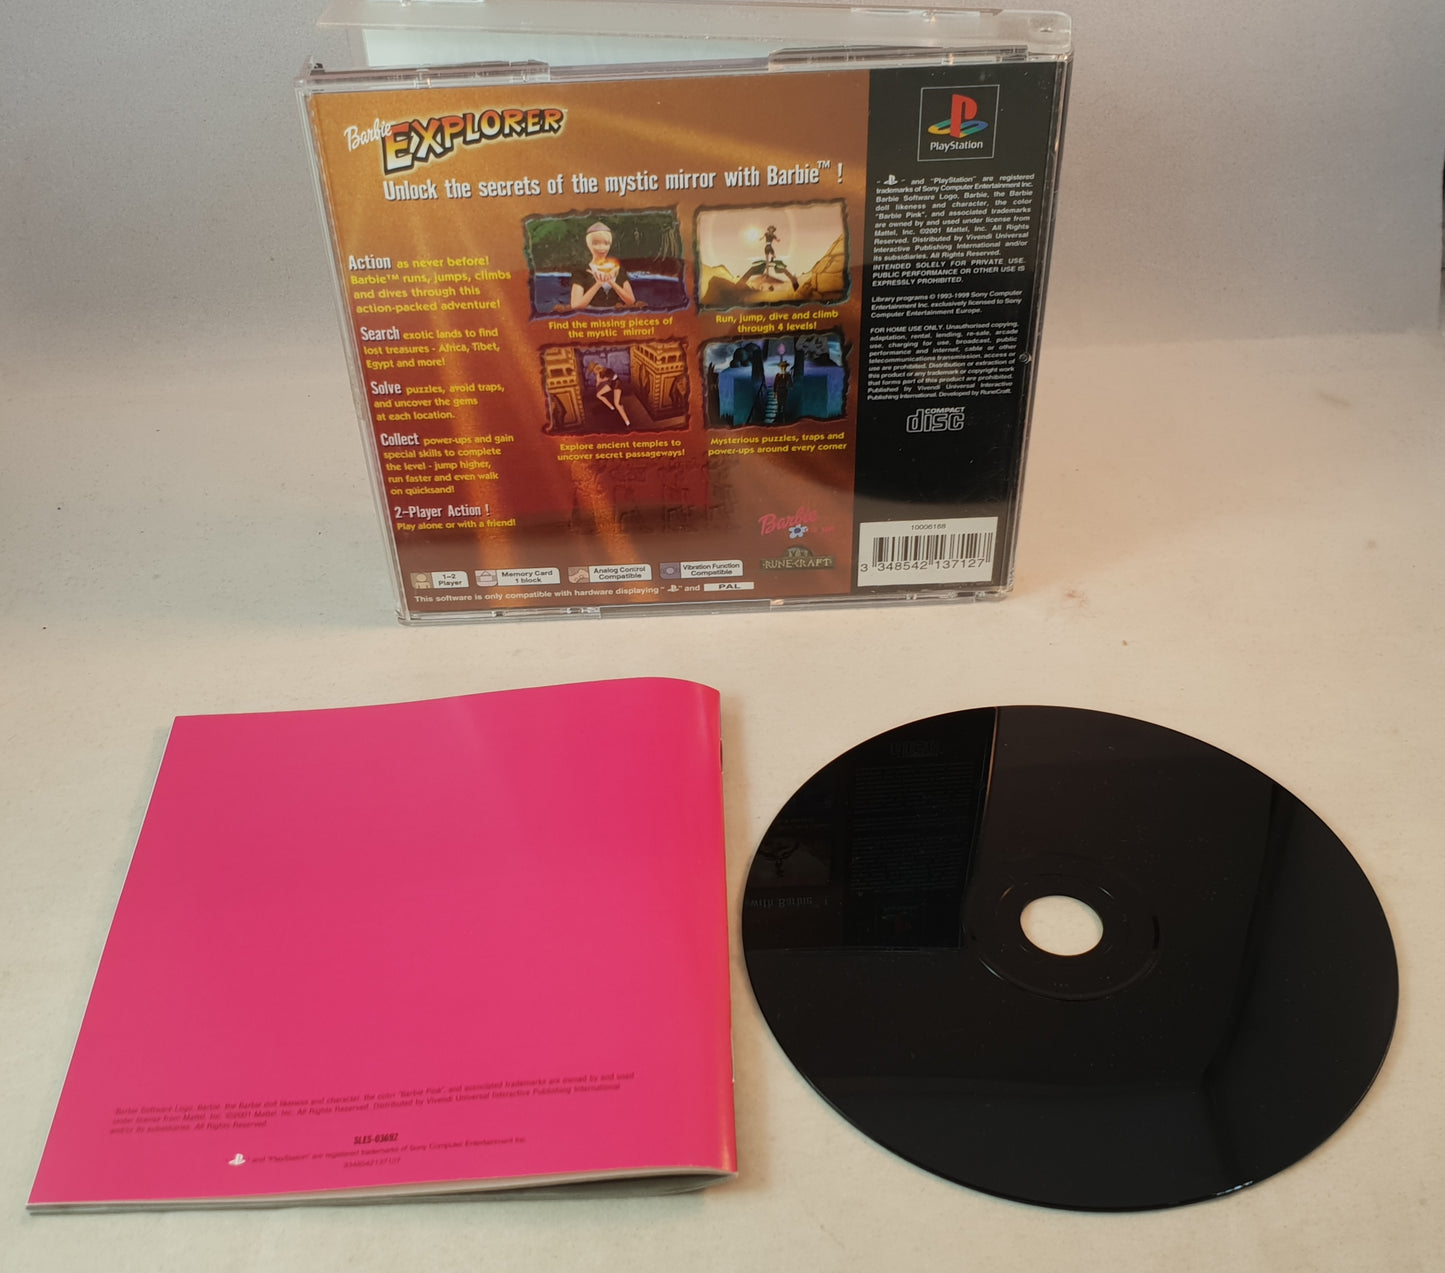 Barbie Explorer Sony Playstation 1 (PS1) Game